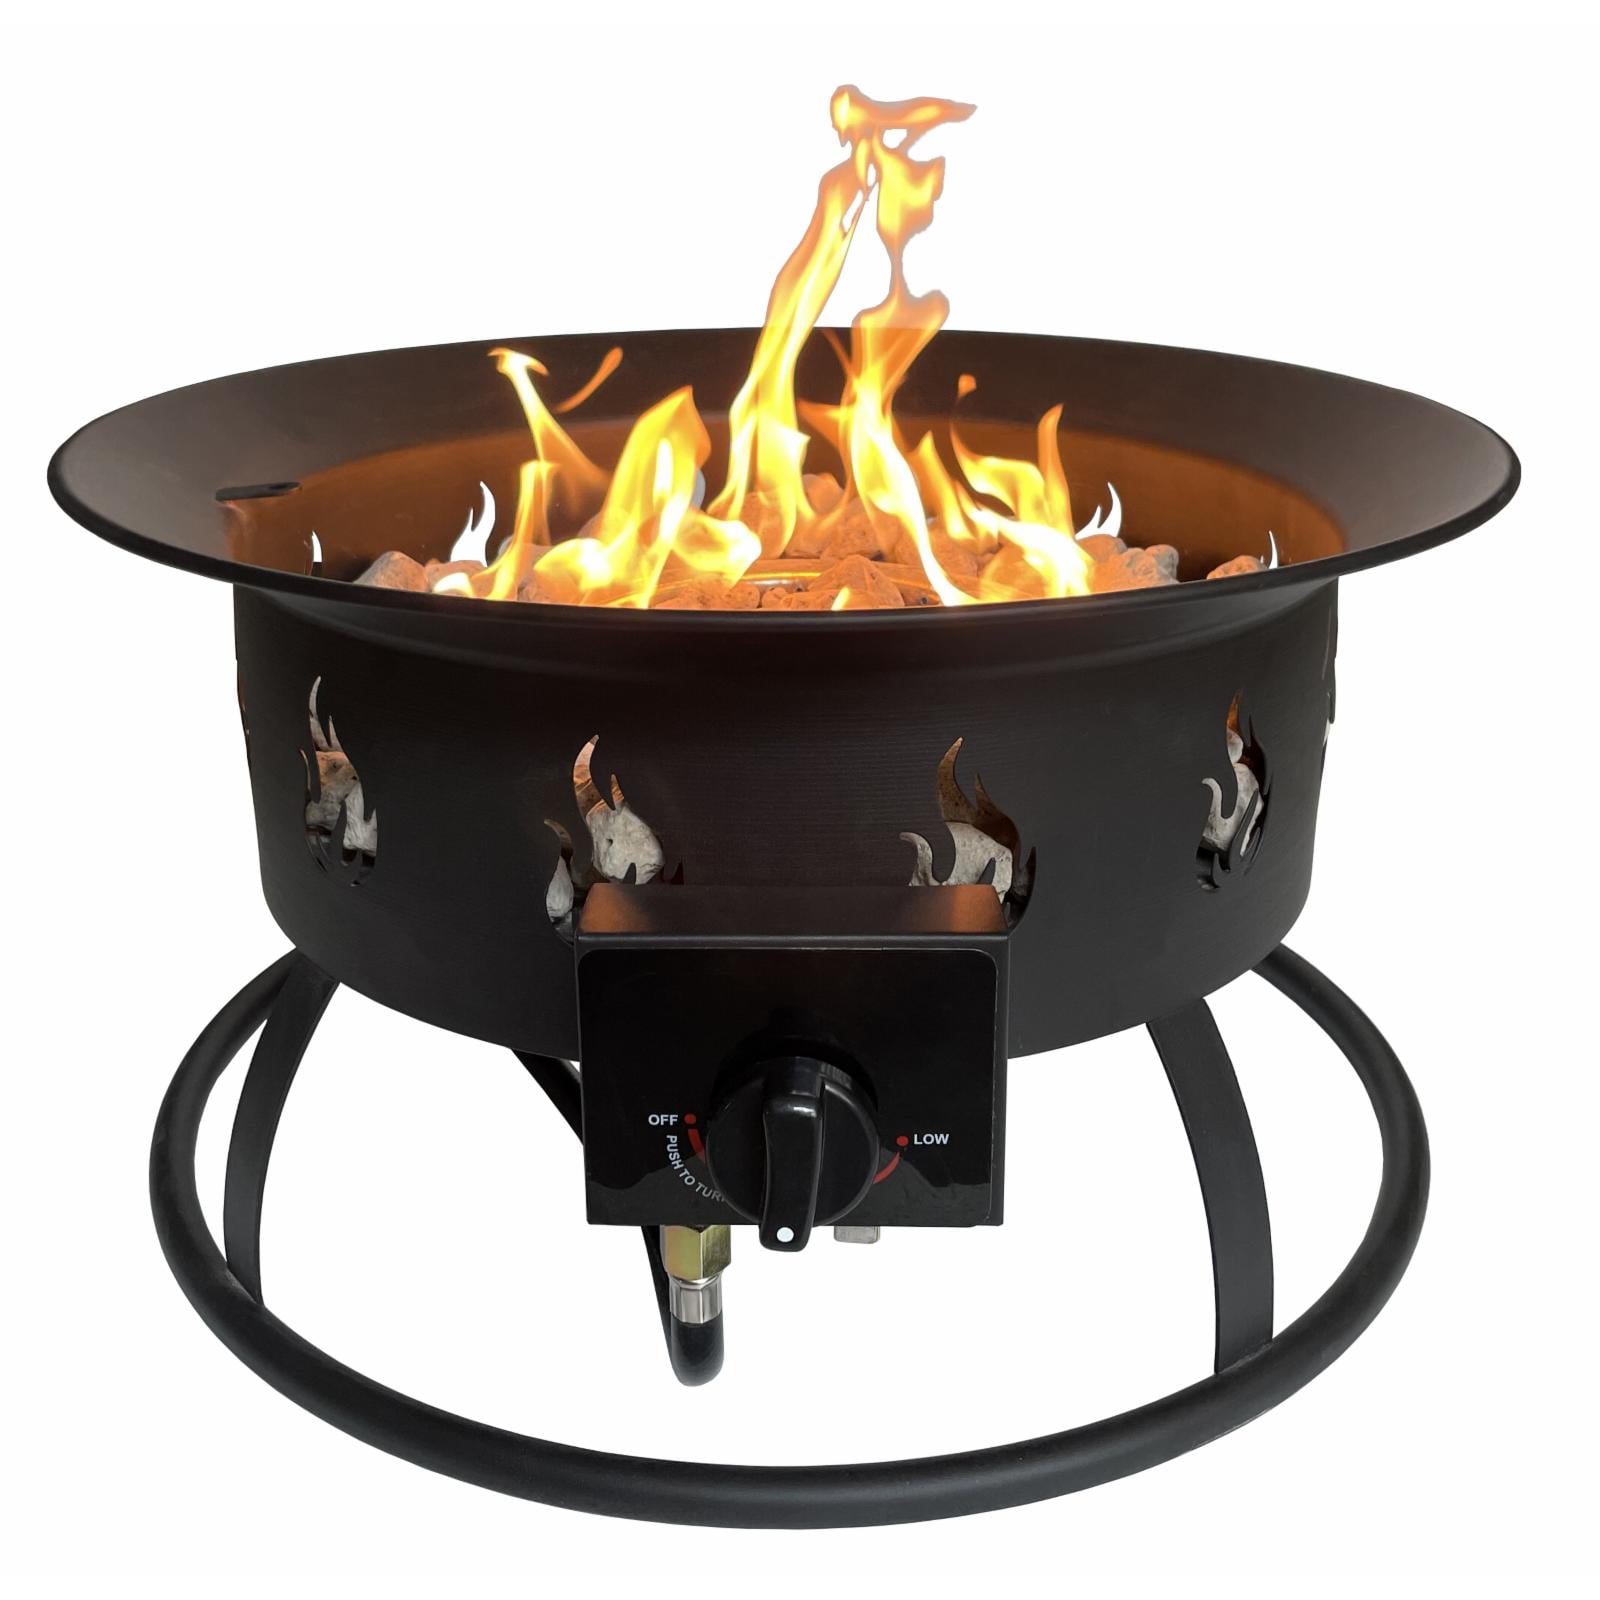 Details about   Outland Firebowl 893 Deluxe Outdoor Propane Gas Fire Pit with Cover & Carry Kit 